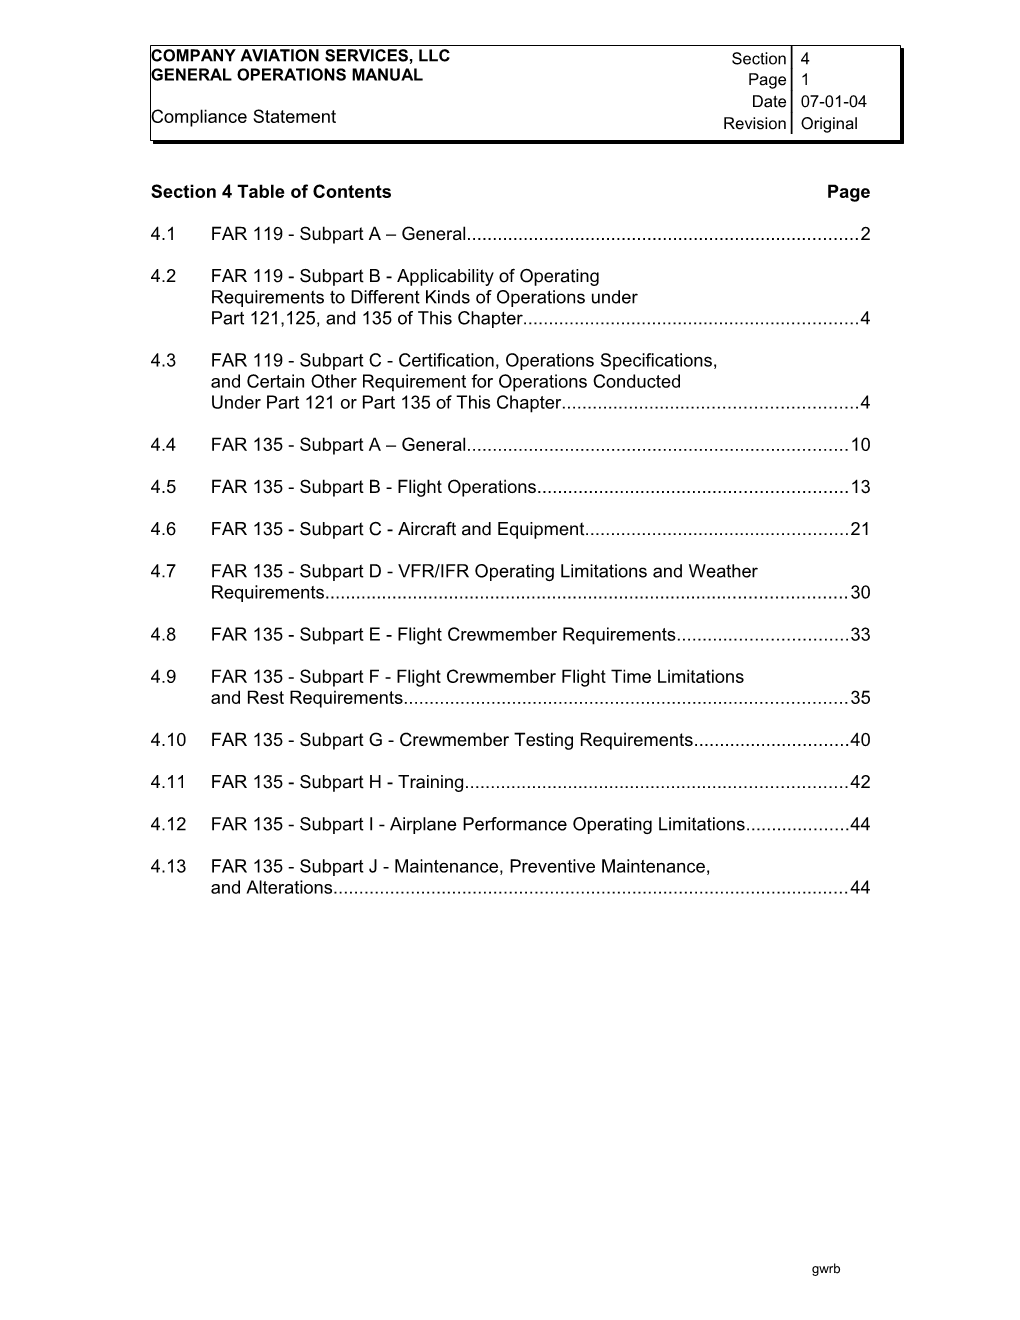 Section 4 Table of Contents Page